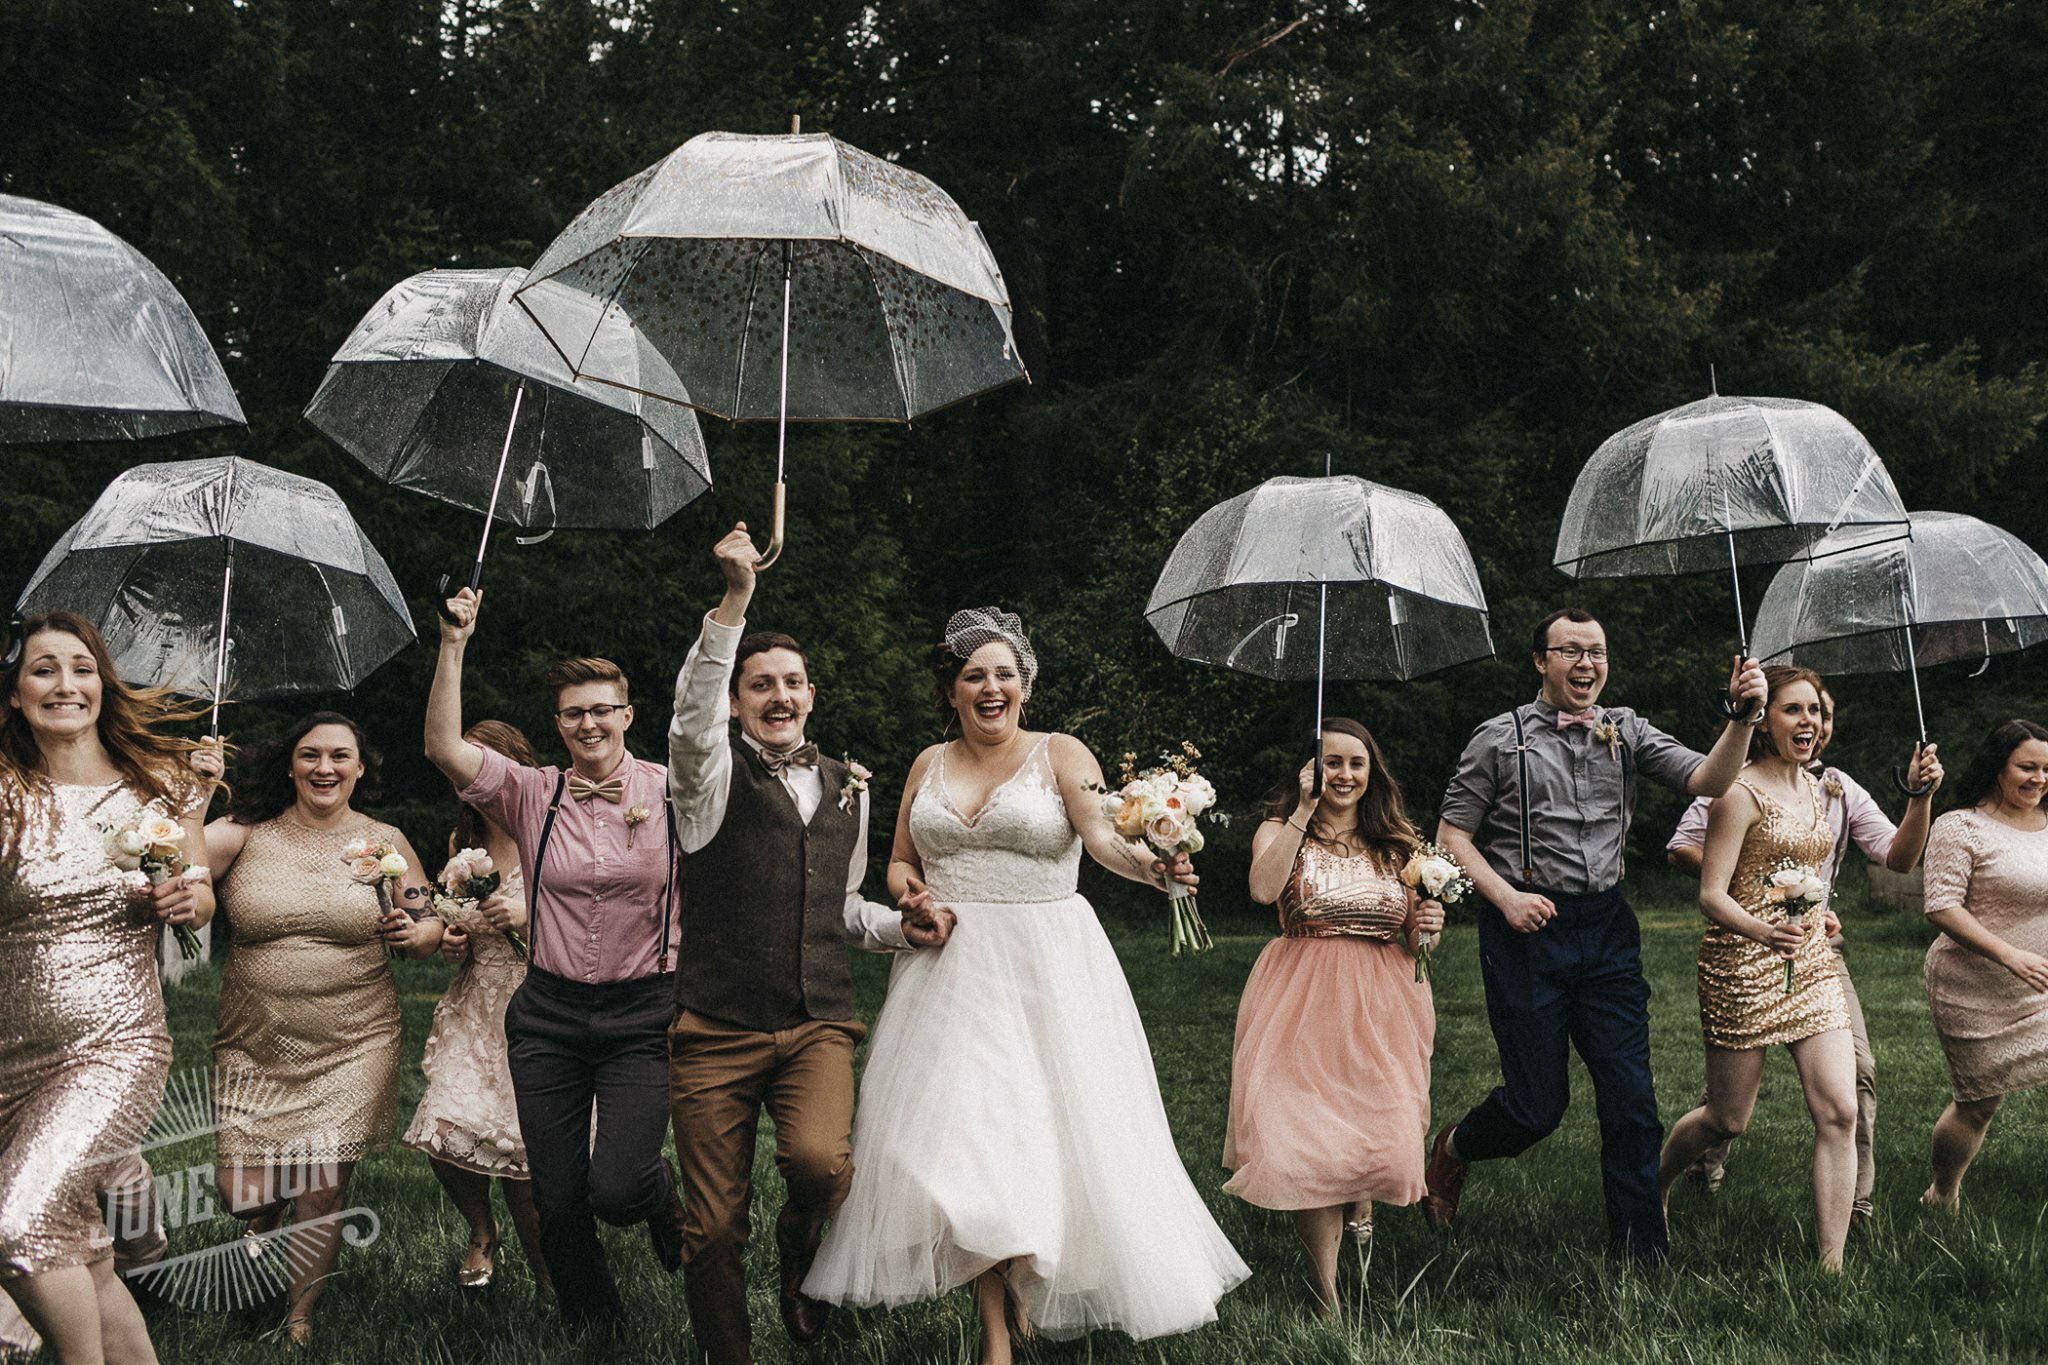 a wedding couple and the bridesmaids and groomsmen running towards the camera holding umbrellas